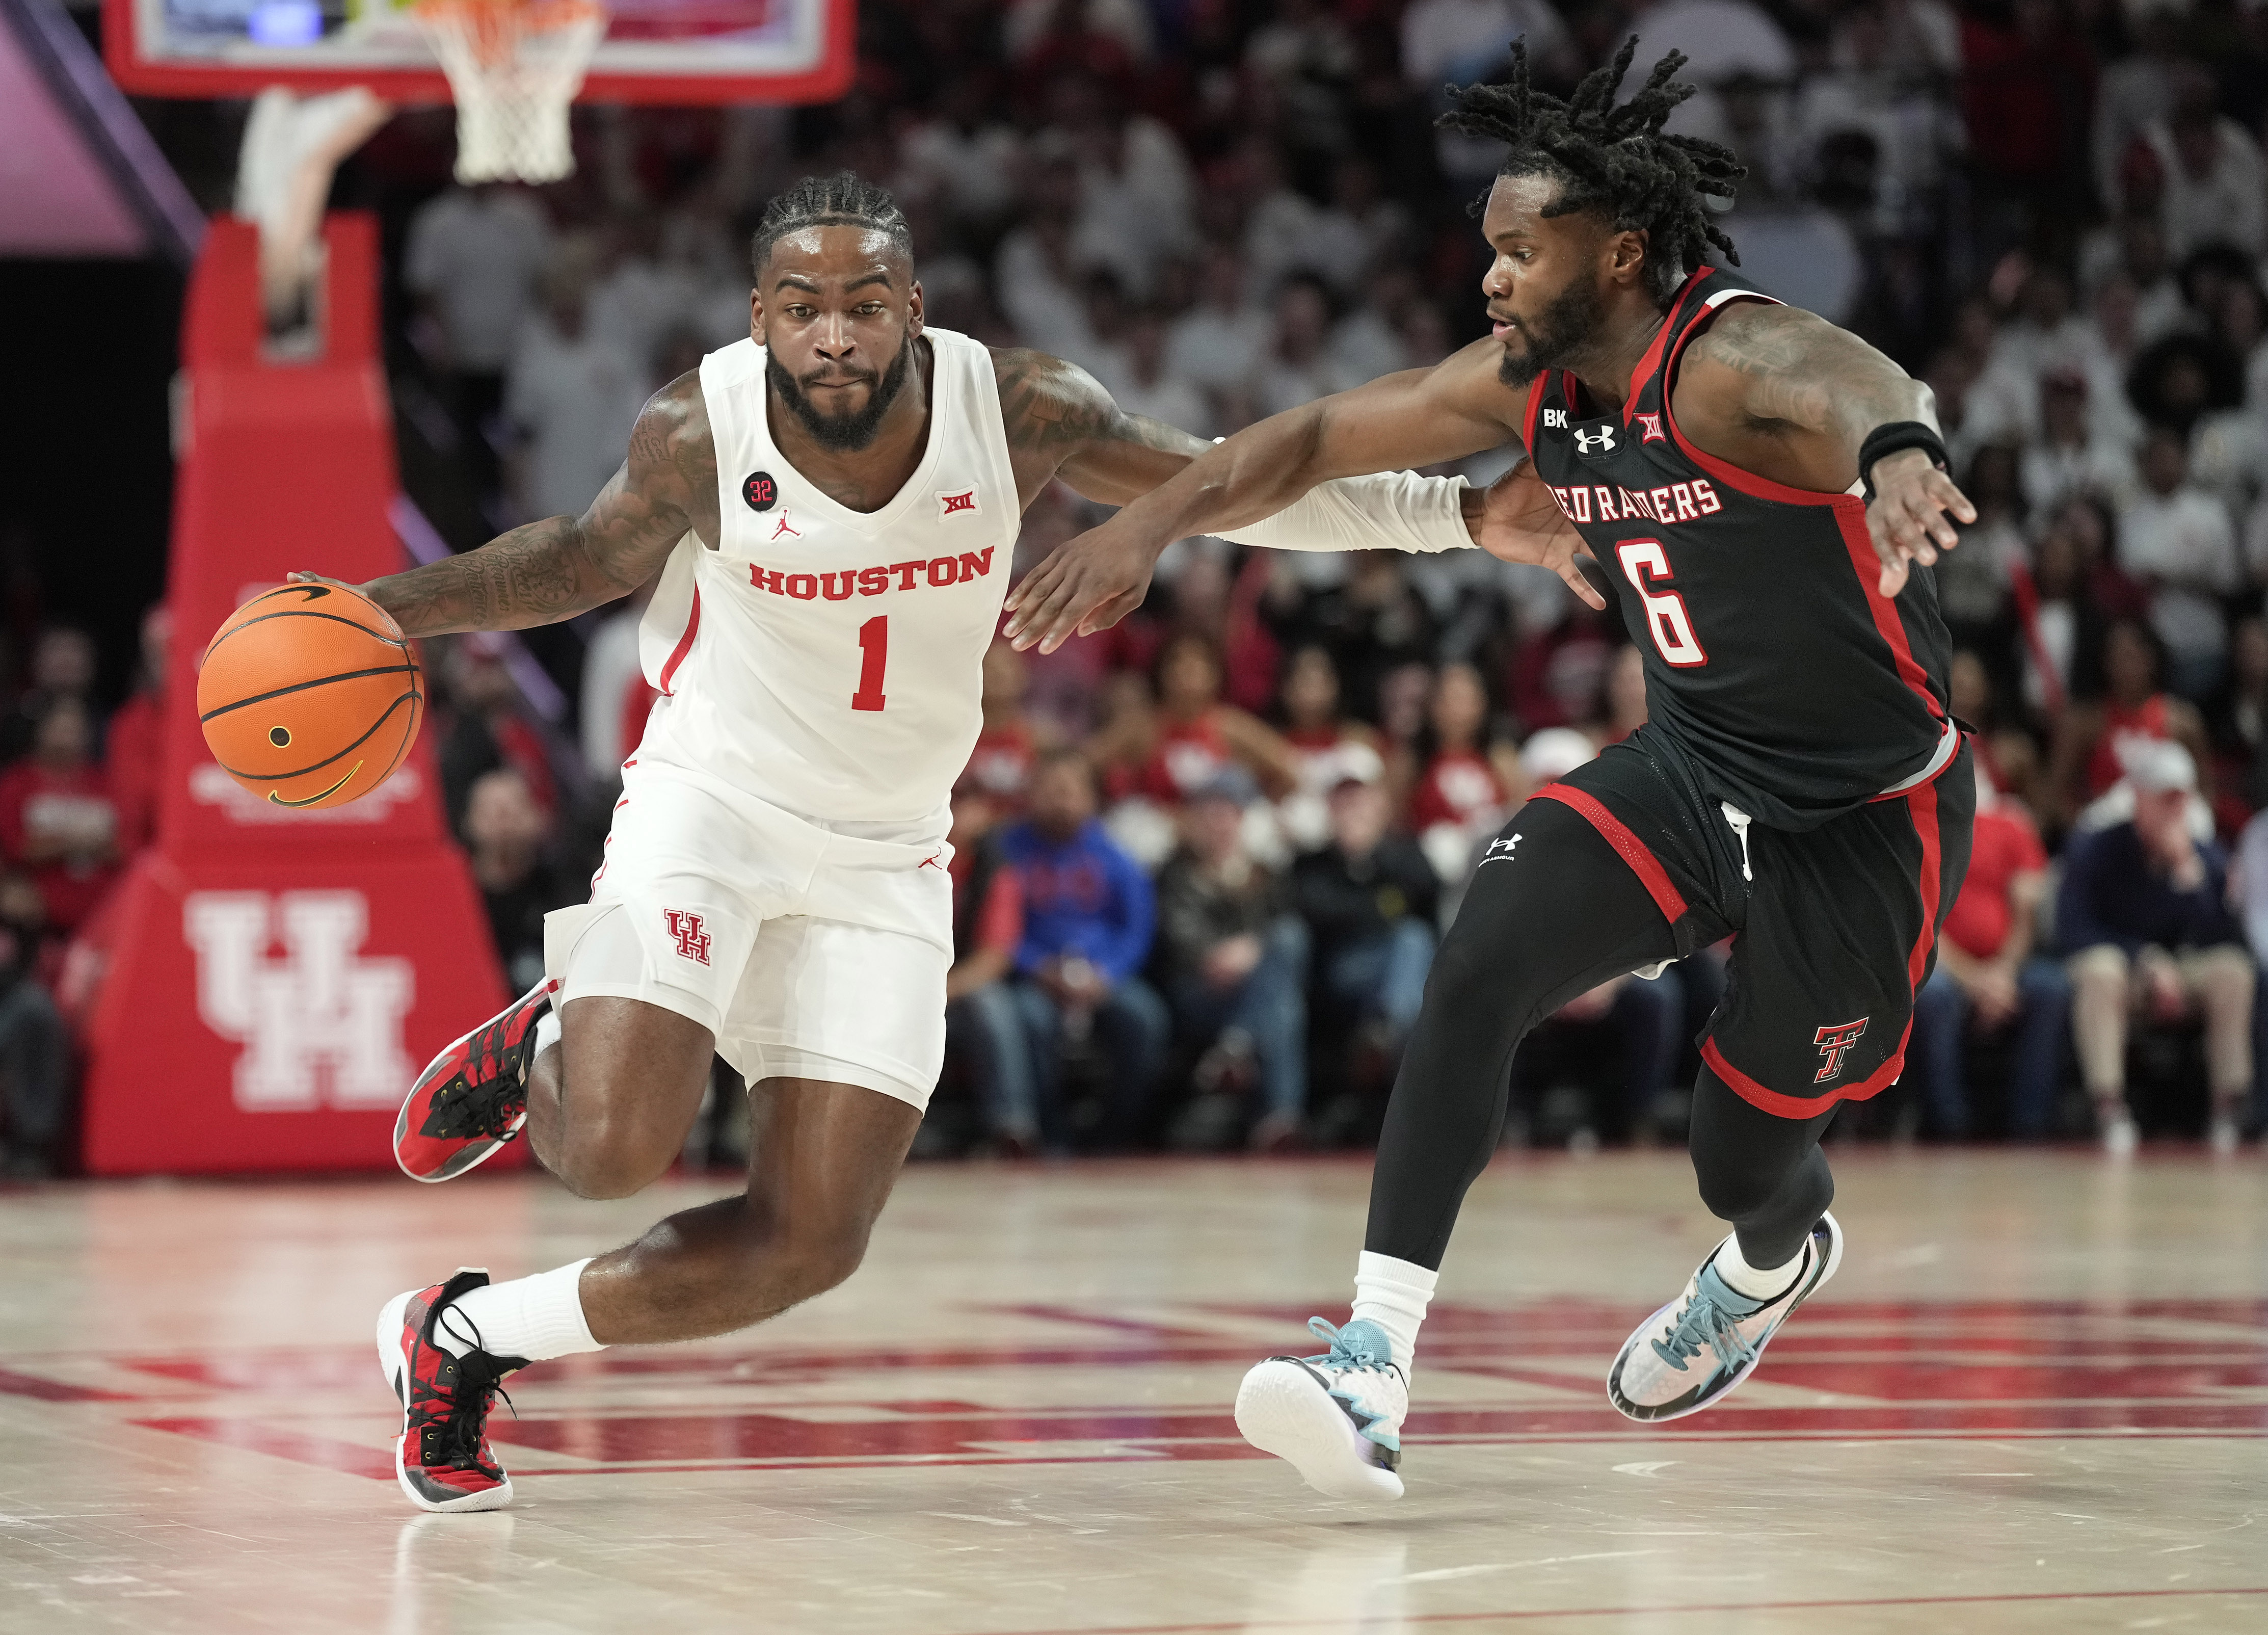 Houston Cougars guard Jamal Shead, wearing the number 1, drives the ball against Texas Tech Red Raiders guard Joe Toussaint, number 6, during the second half of a mens NCAA basketball game at the Fertitta Center on January 17.